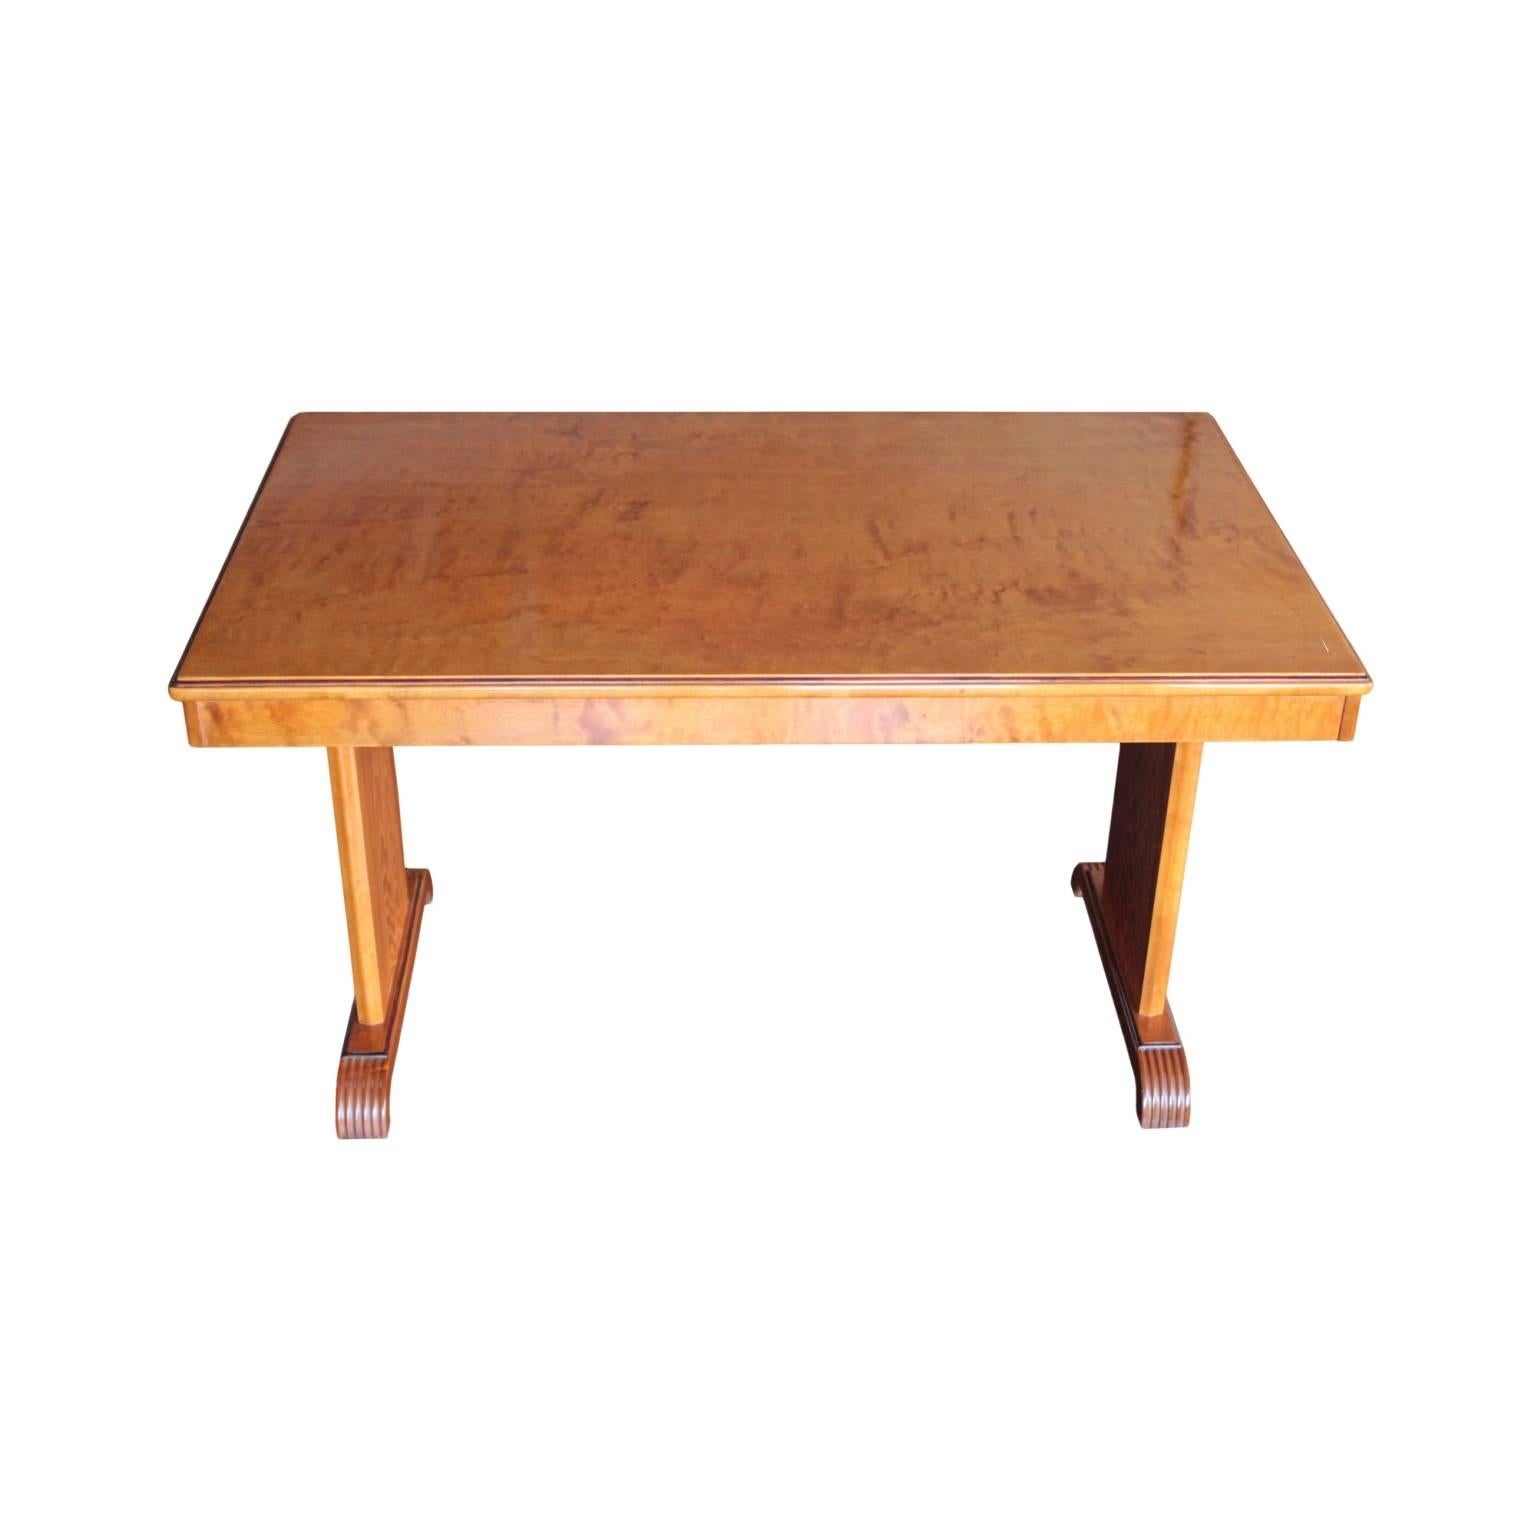 Swedish Art Deco Period Rectangular Inlaid Table In Excellent Condition For Sale In Hudson, NY